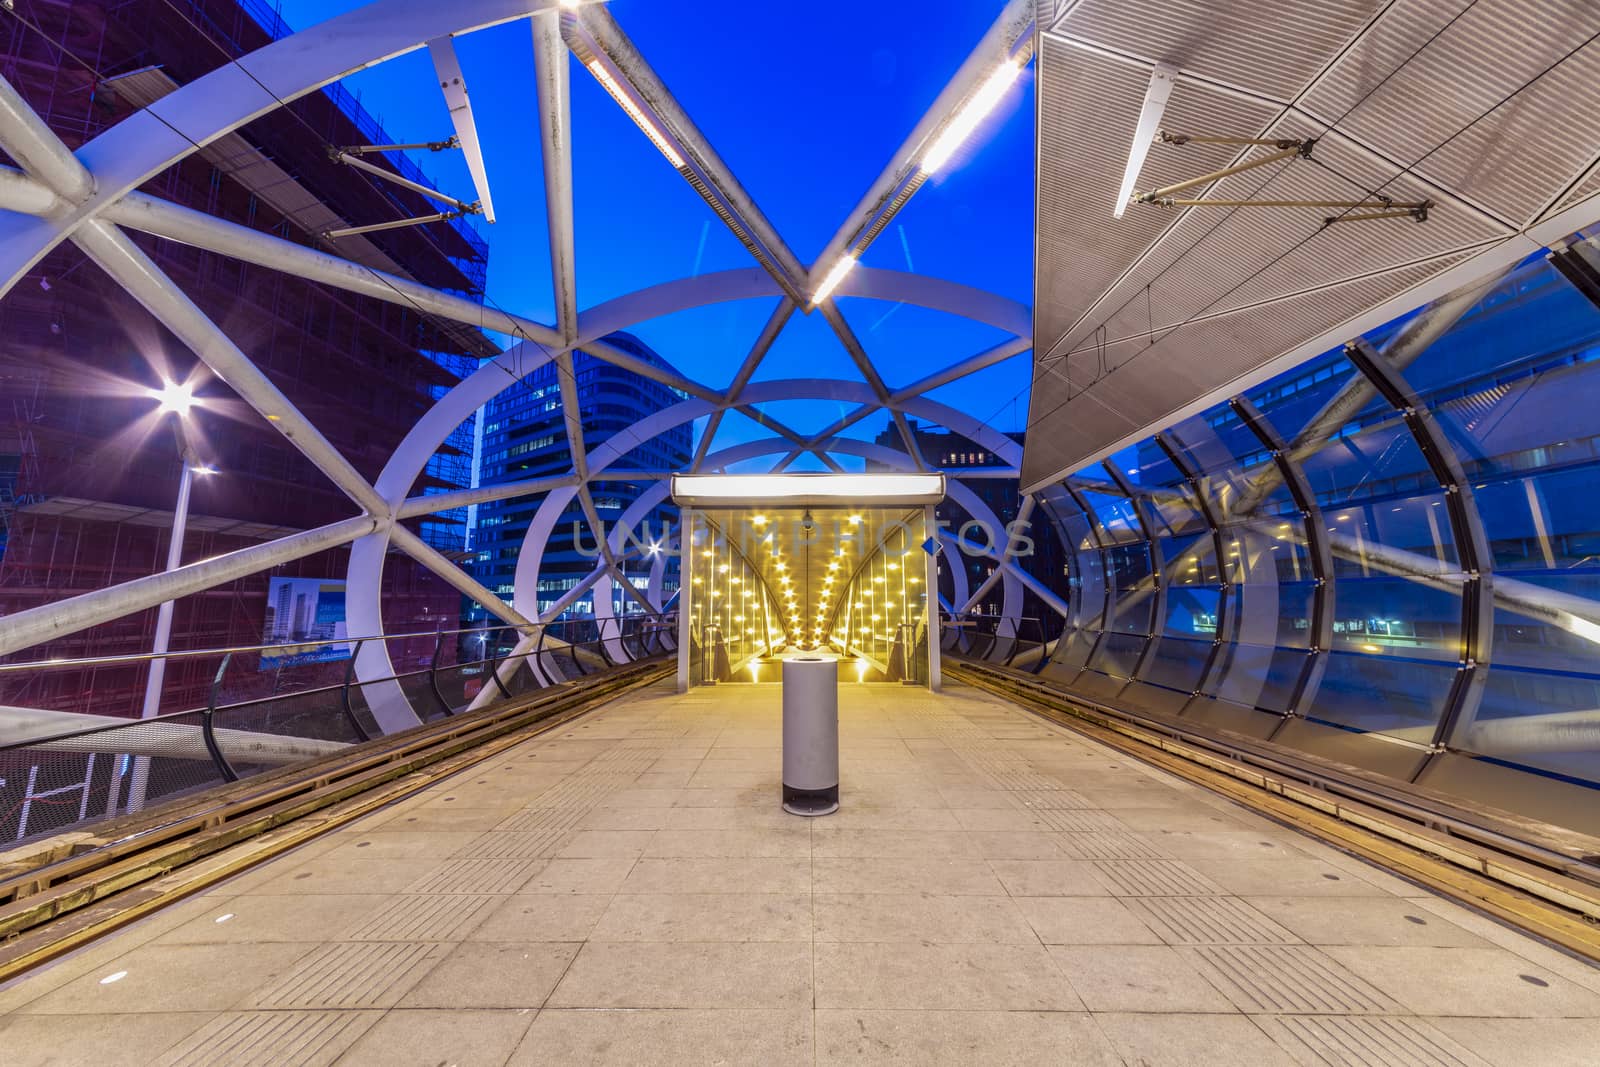 The Hague Beatrixkwartier tram station platform illumated at night waiting for passengers during the blue hour, The Hague, Netherlands
